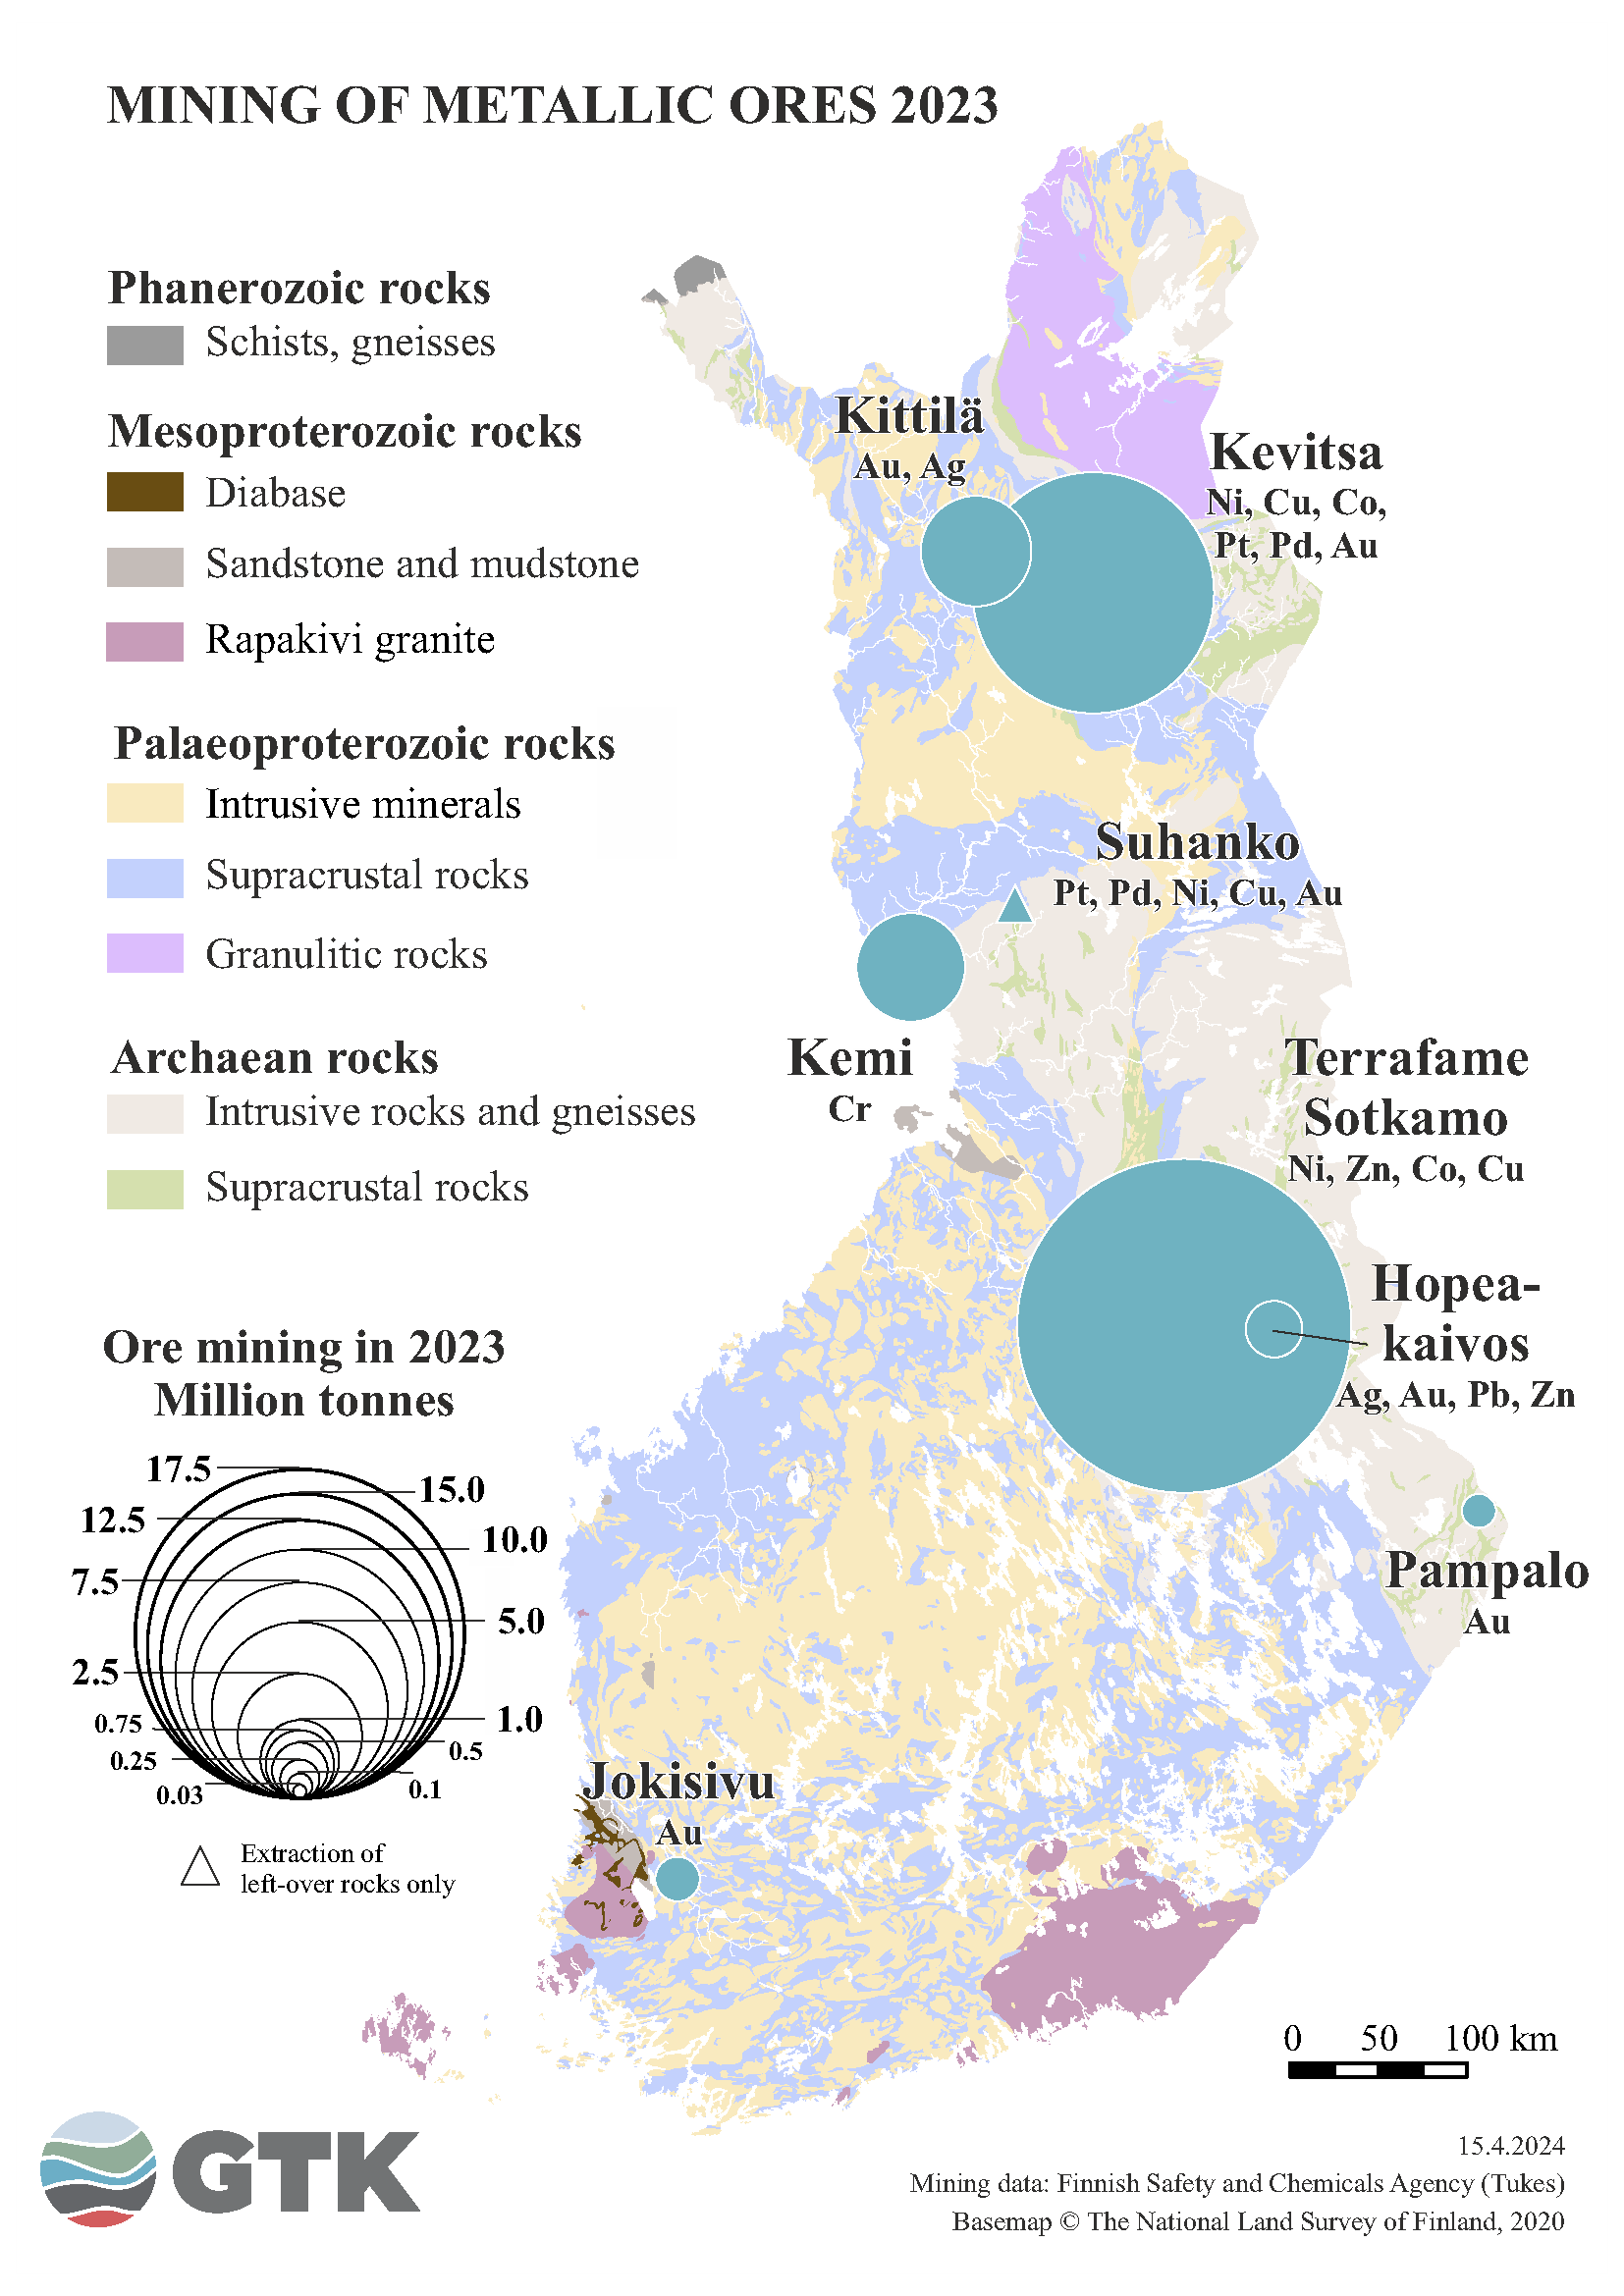 Mining of metallic ores on the map of Finland